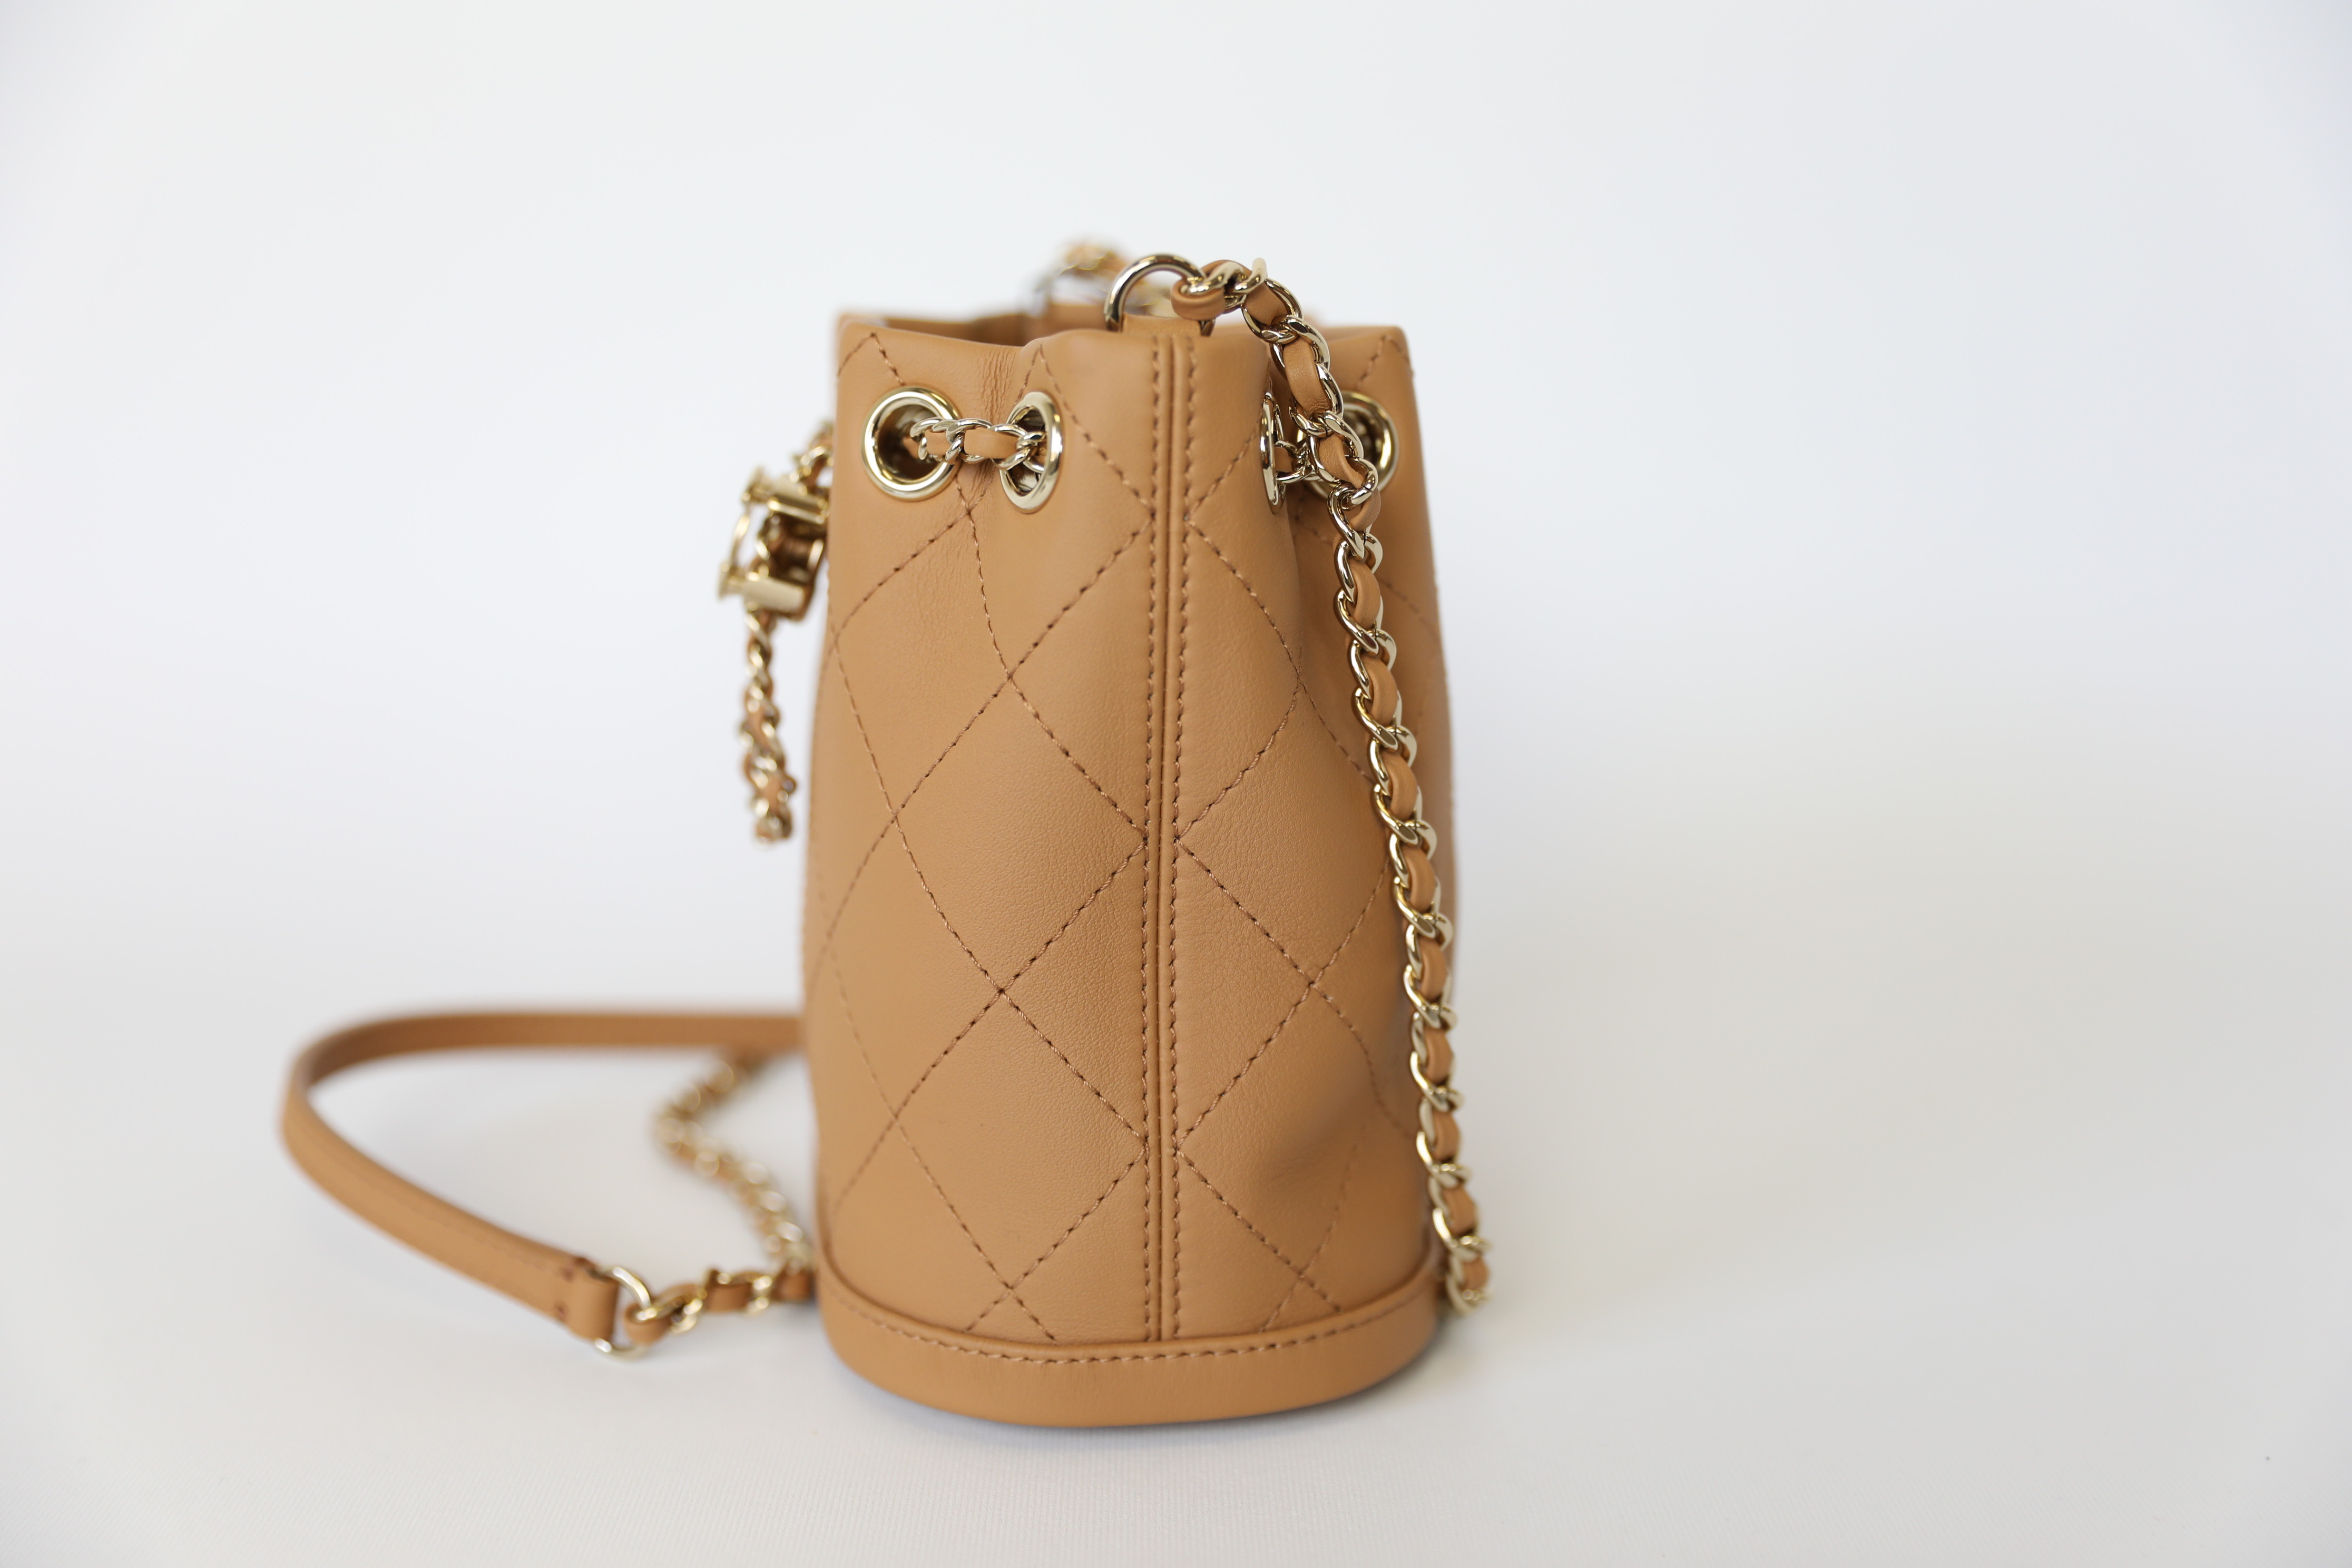 Chanel Drawstring Quilted Bucket Bag, Beige Calfskin with Gold Hardware,  New in Dustbag WA001